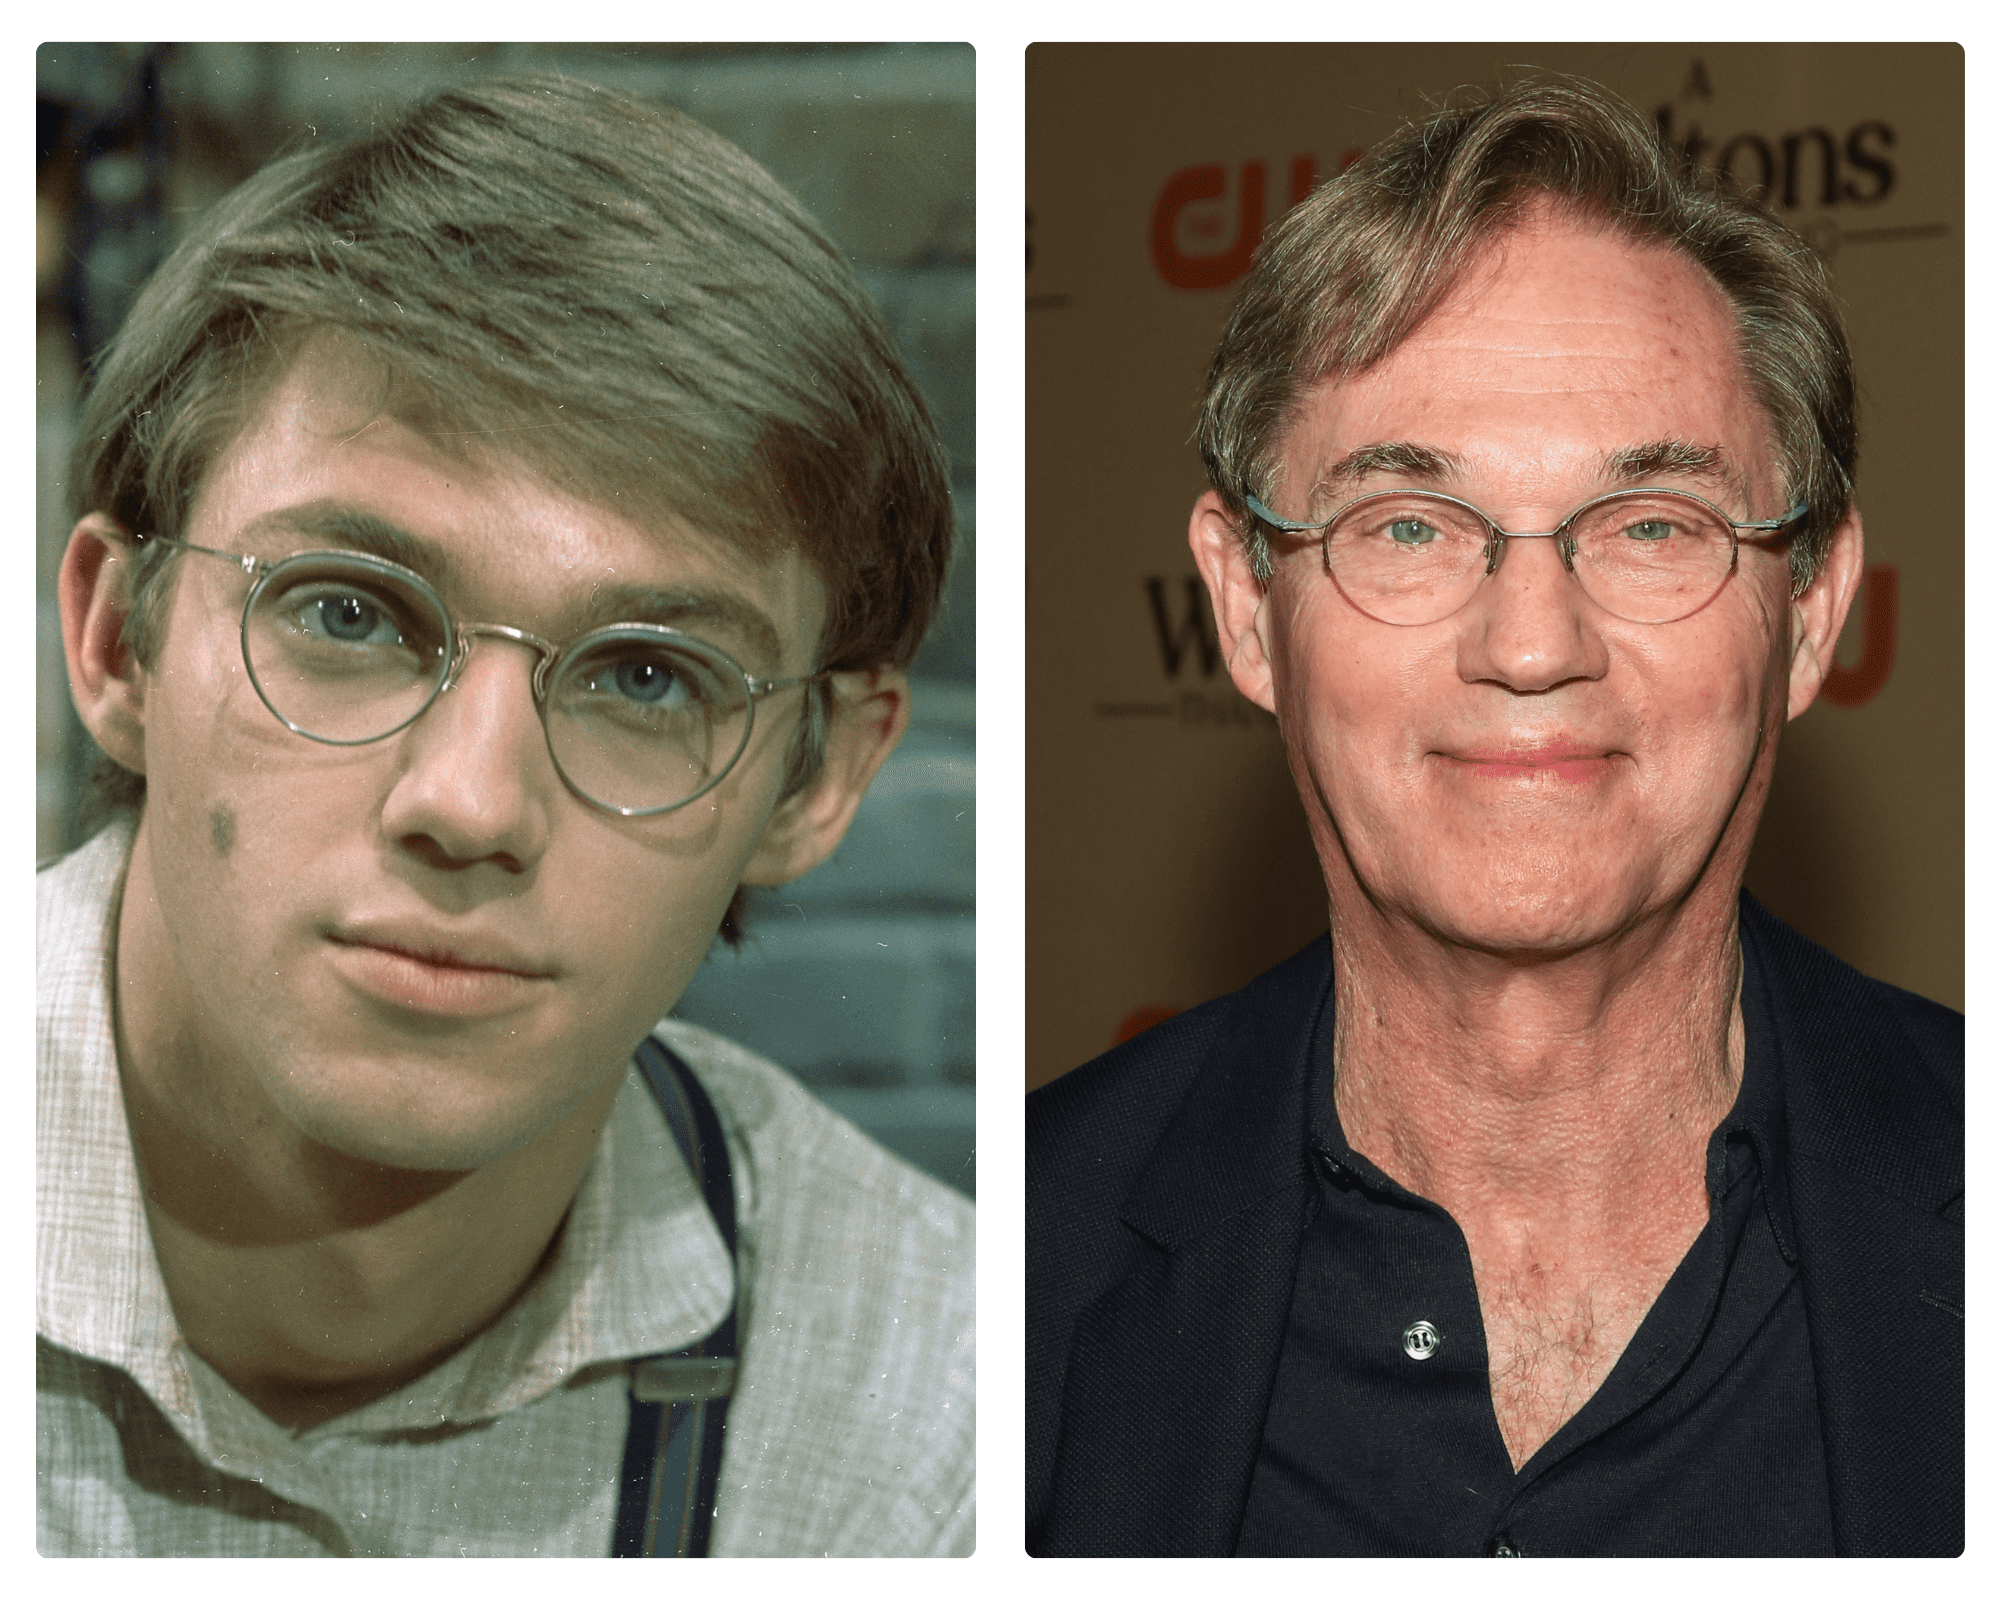 Richard Thomas | Source: Getty Images